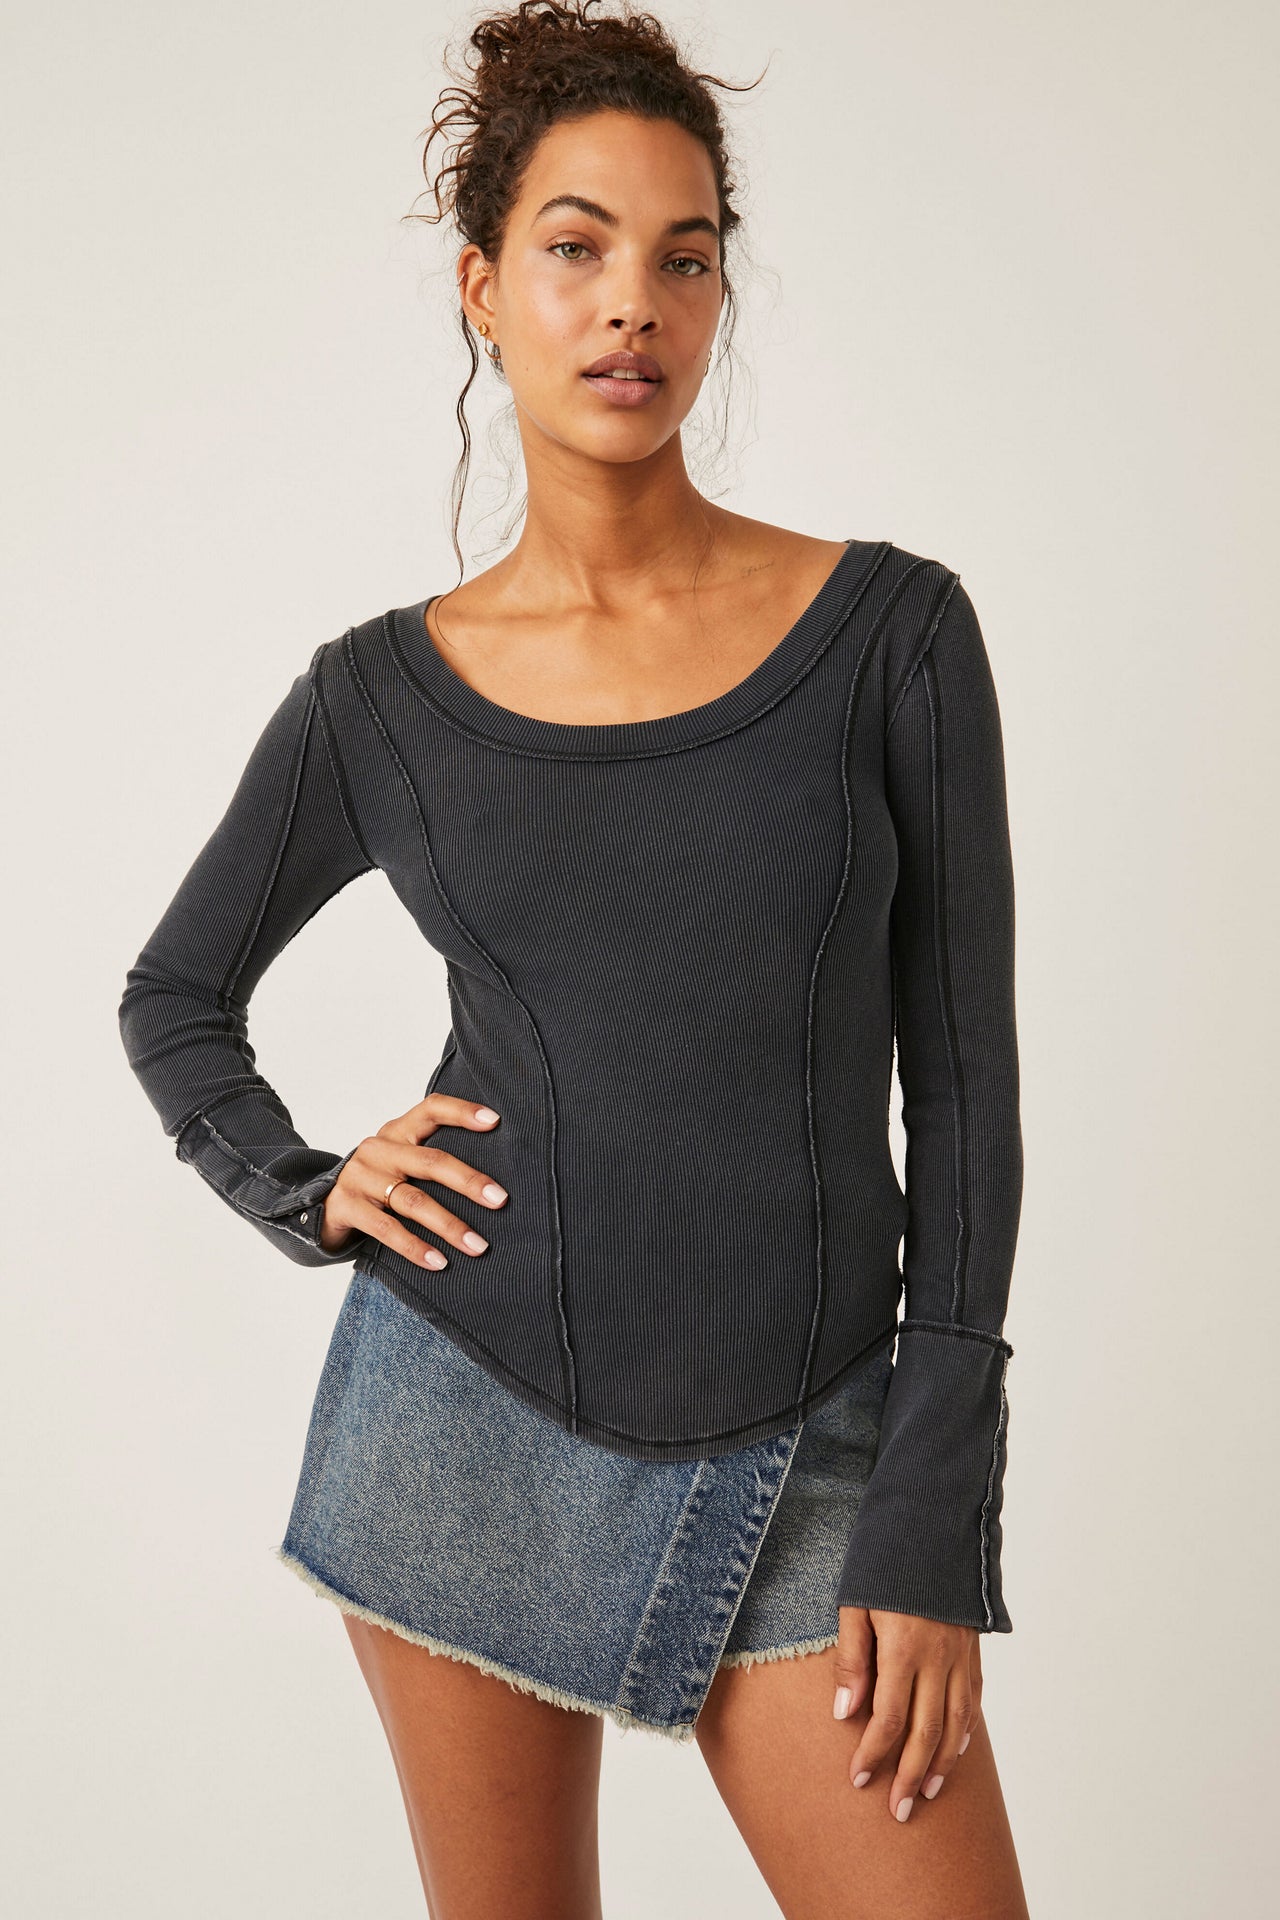 Stuck On You Cuff Black, Long Tee by Free People | LIT Boutique